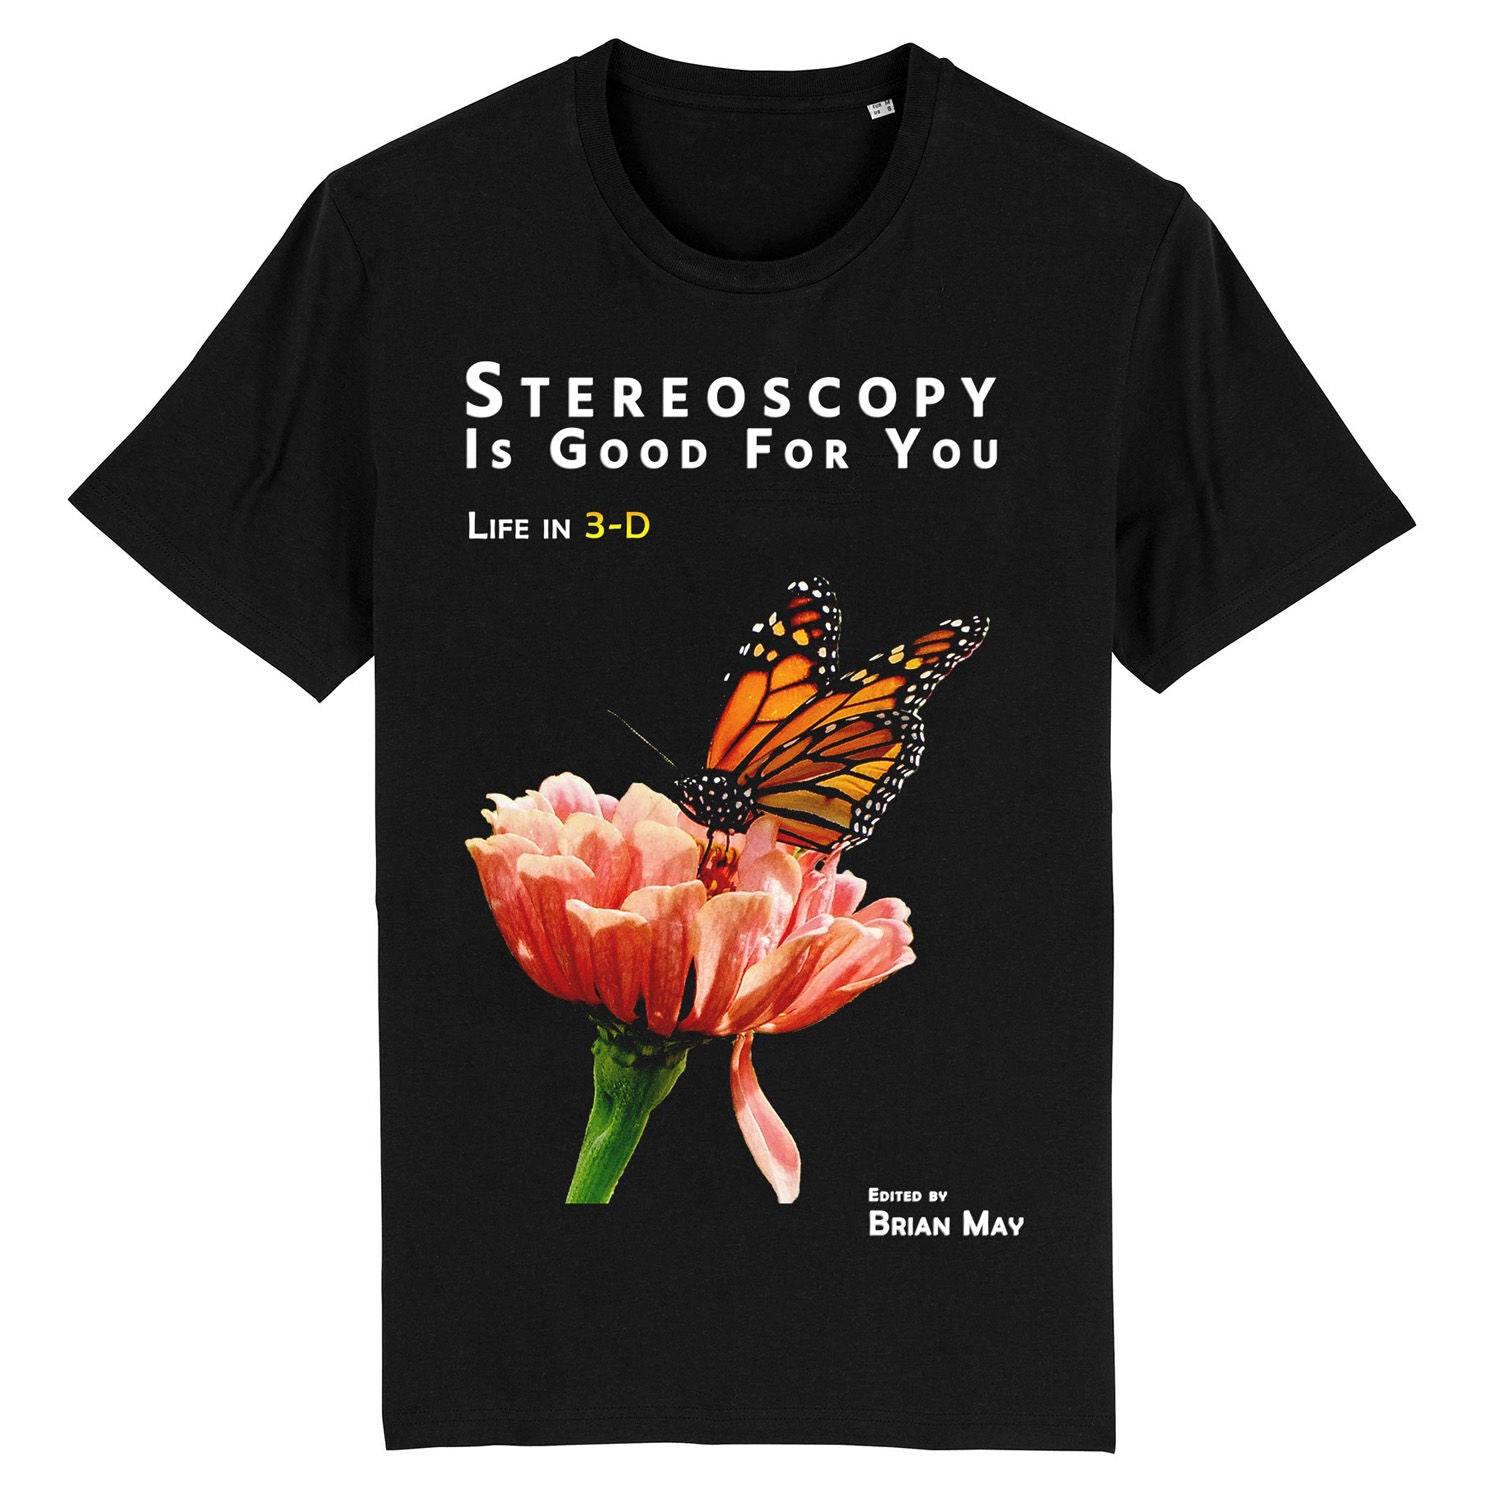 Brian May - Stereoscopy Good For You T-shirt